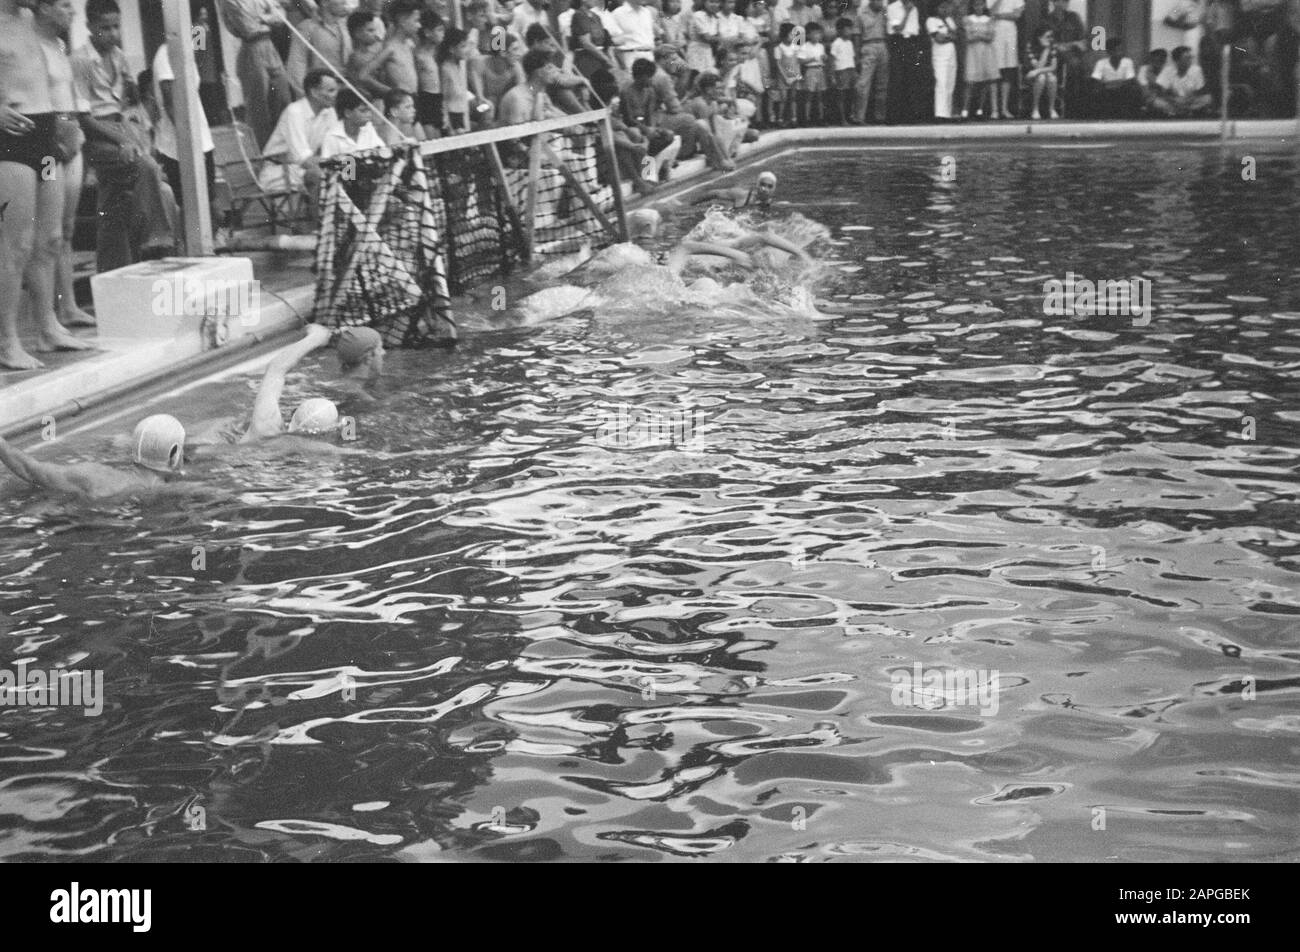 Water polo Description: Collection Photo collection Service for Army Contacts Indonesia, photon number 203-4-2 Date: april 1947 Location: Indonesia, Dutch East Indies Stock Photo